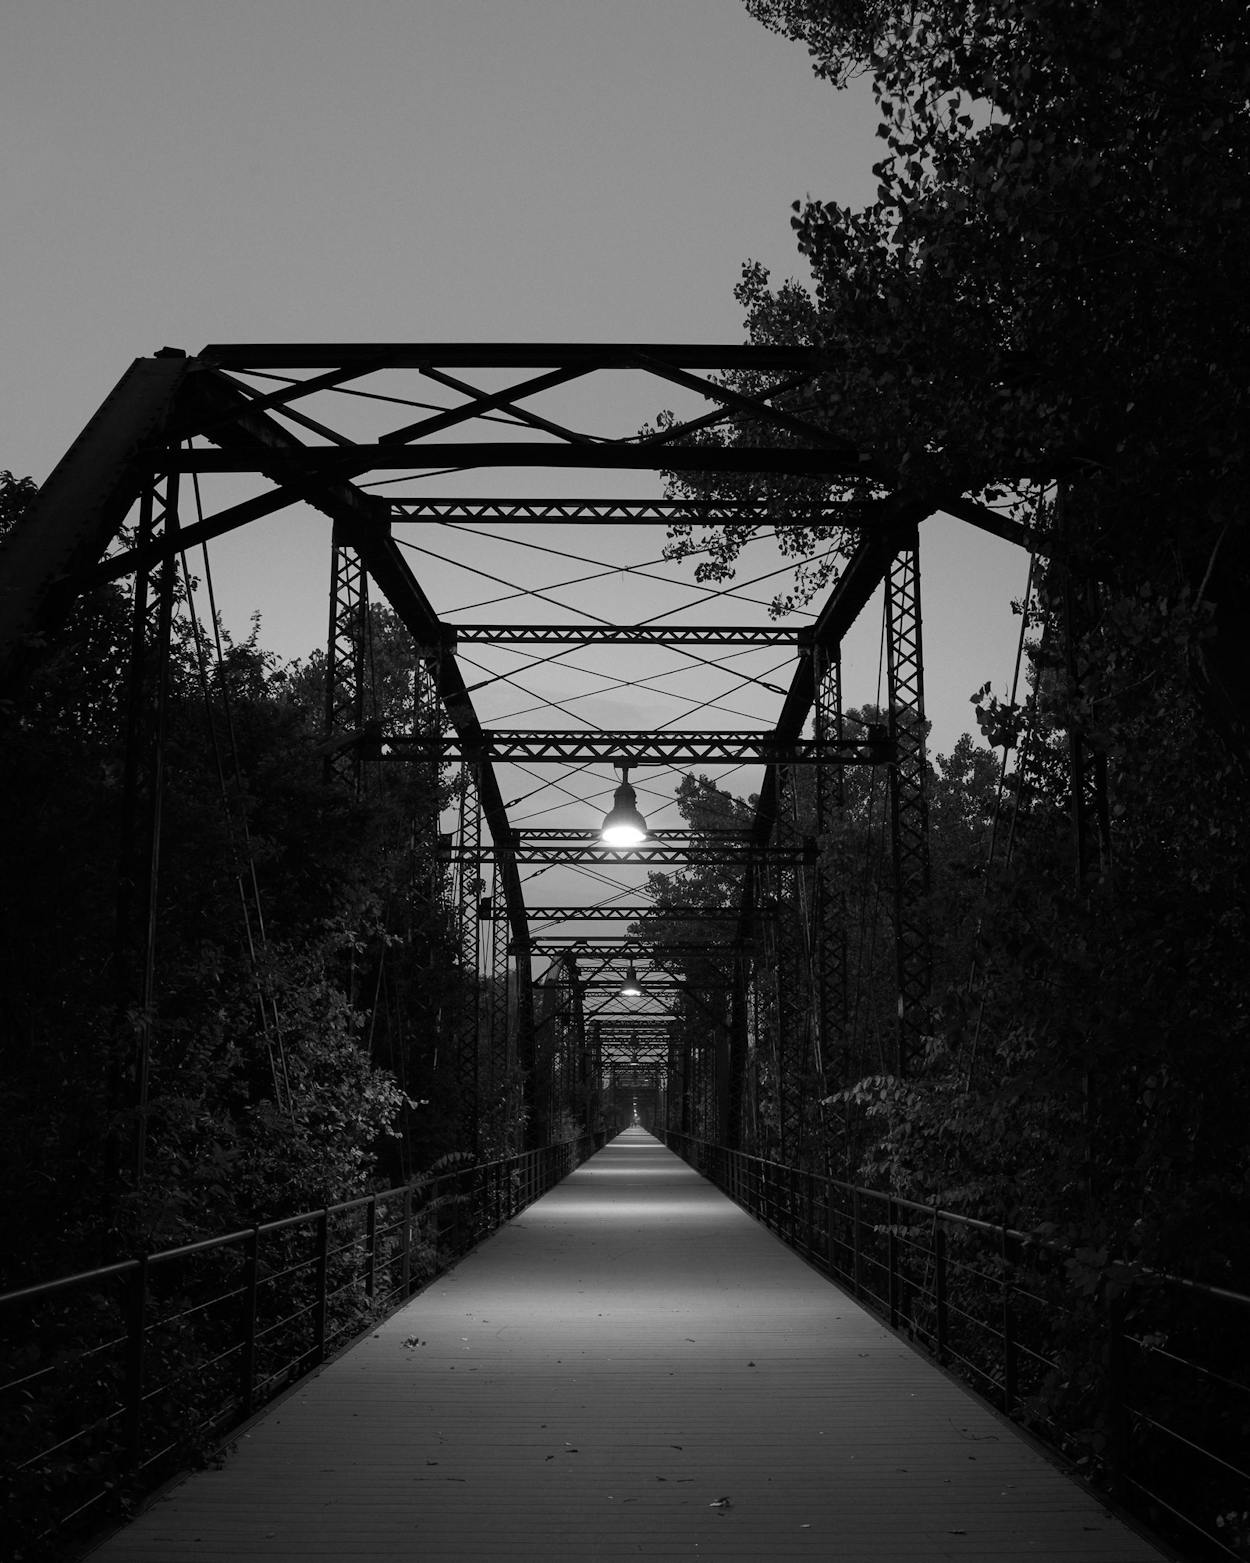 The Walking Bridge, just outside of Canadian and one of the places where Tom was last seen.